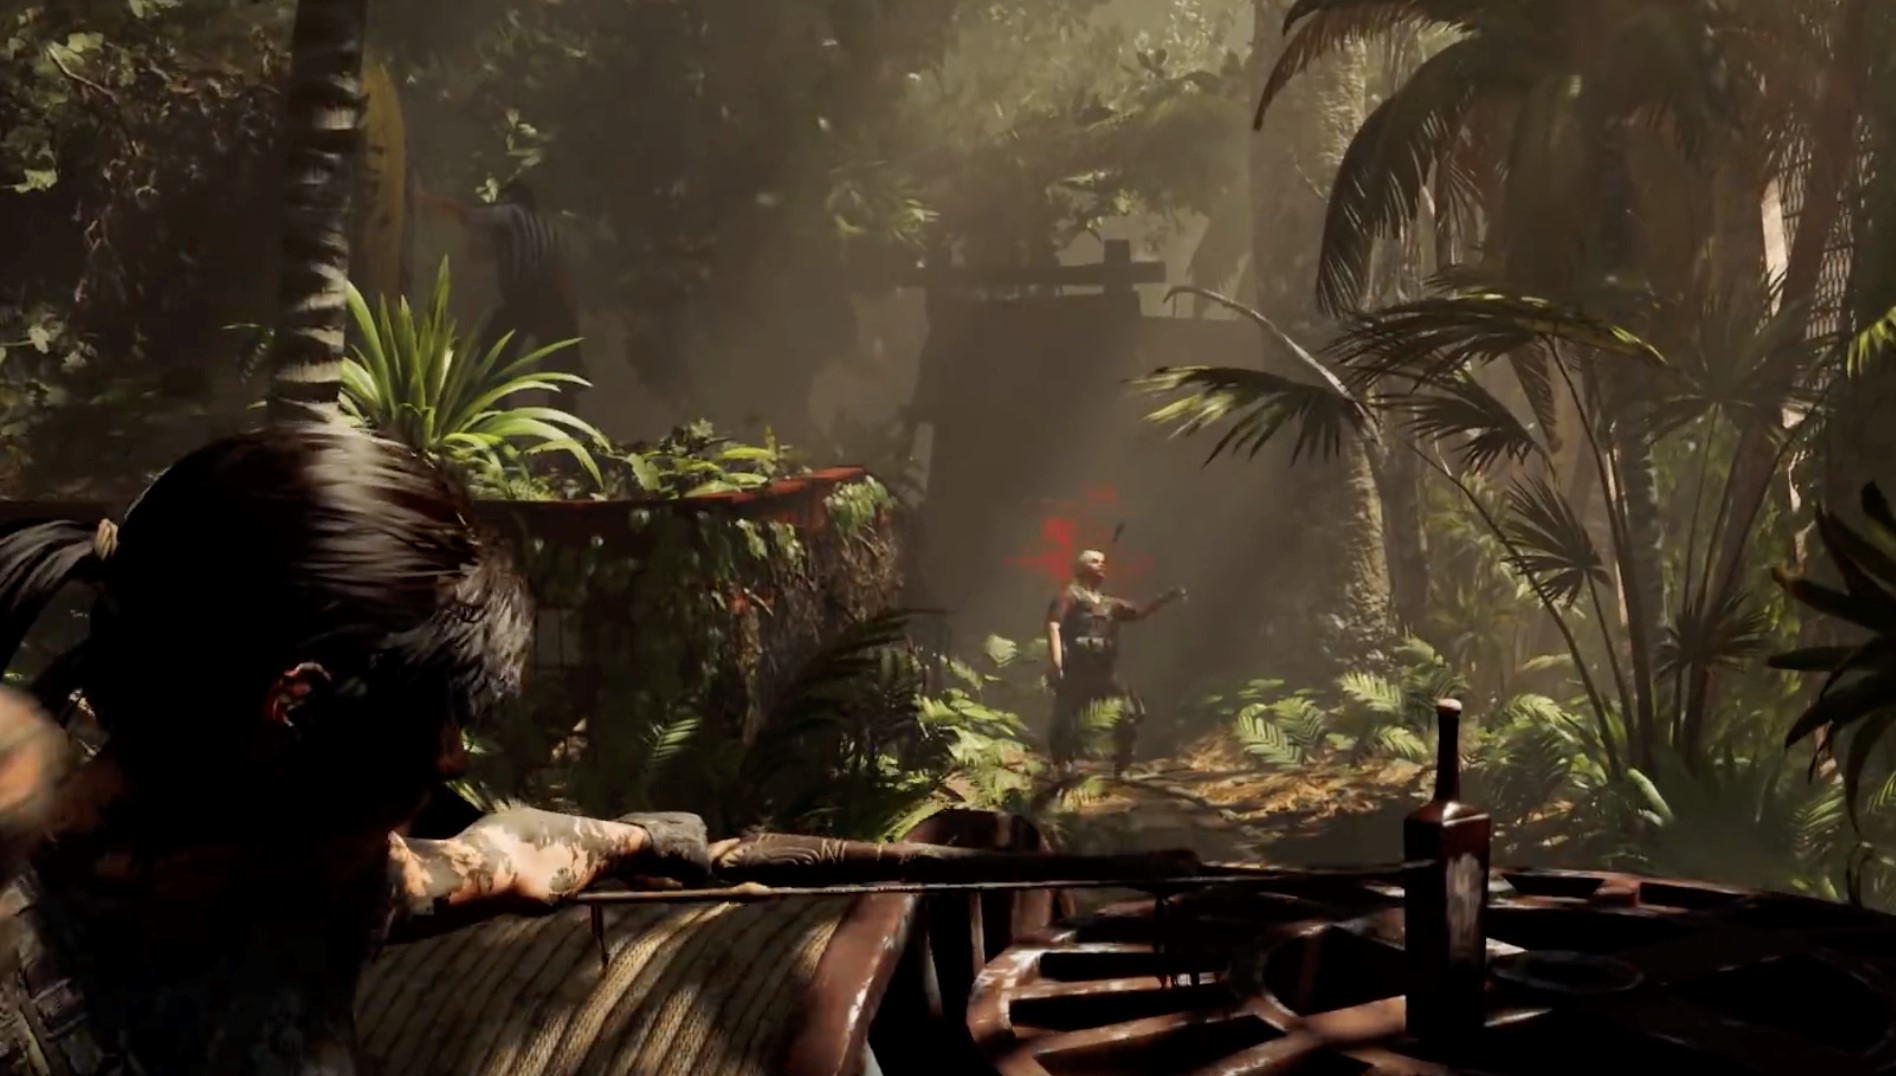 Lara uses several different bows over the course of the game